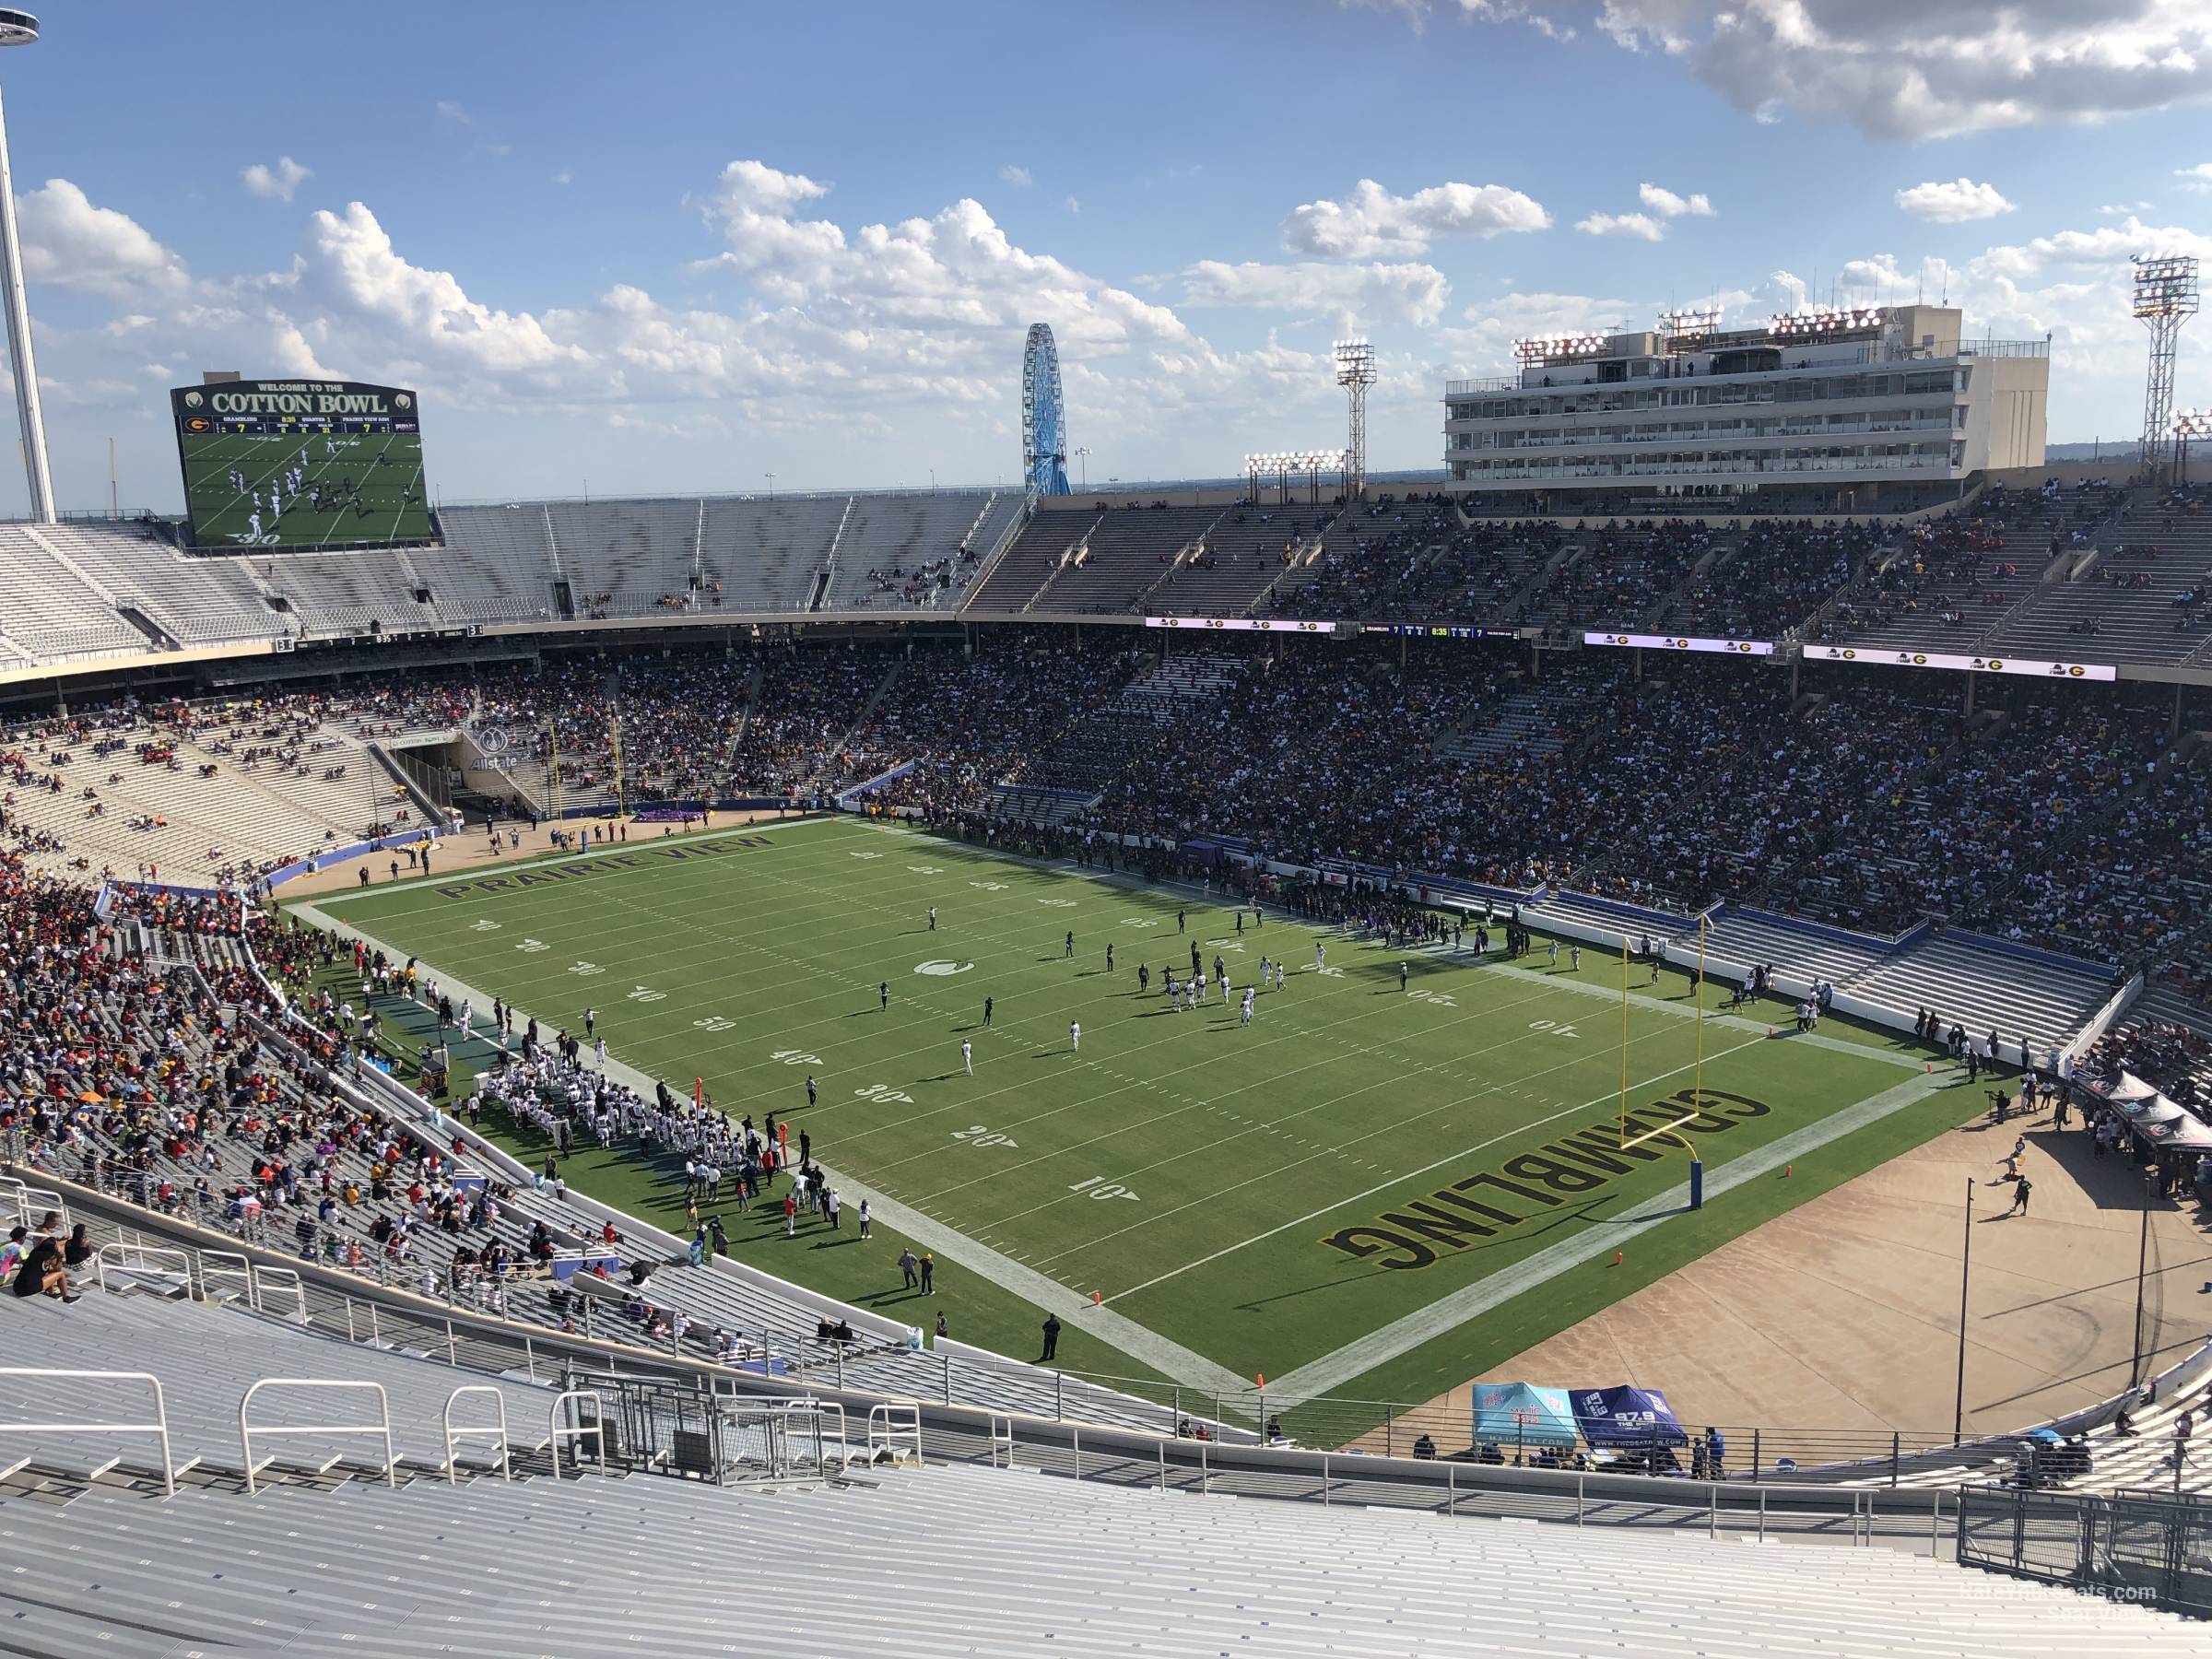 section 121, row 34 seat view  - cotton bowl